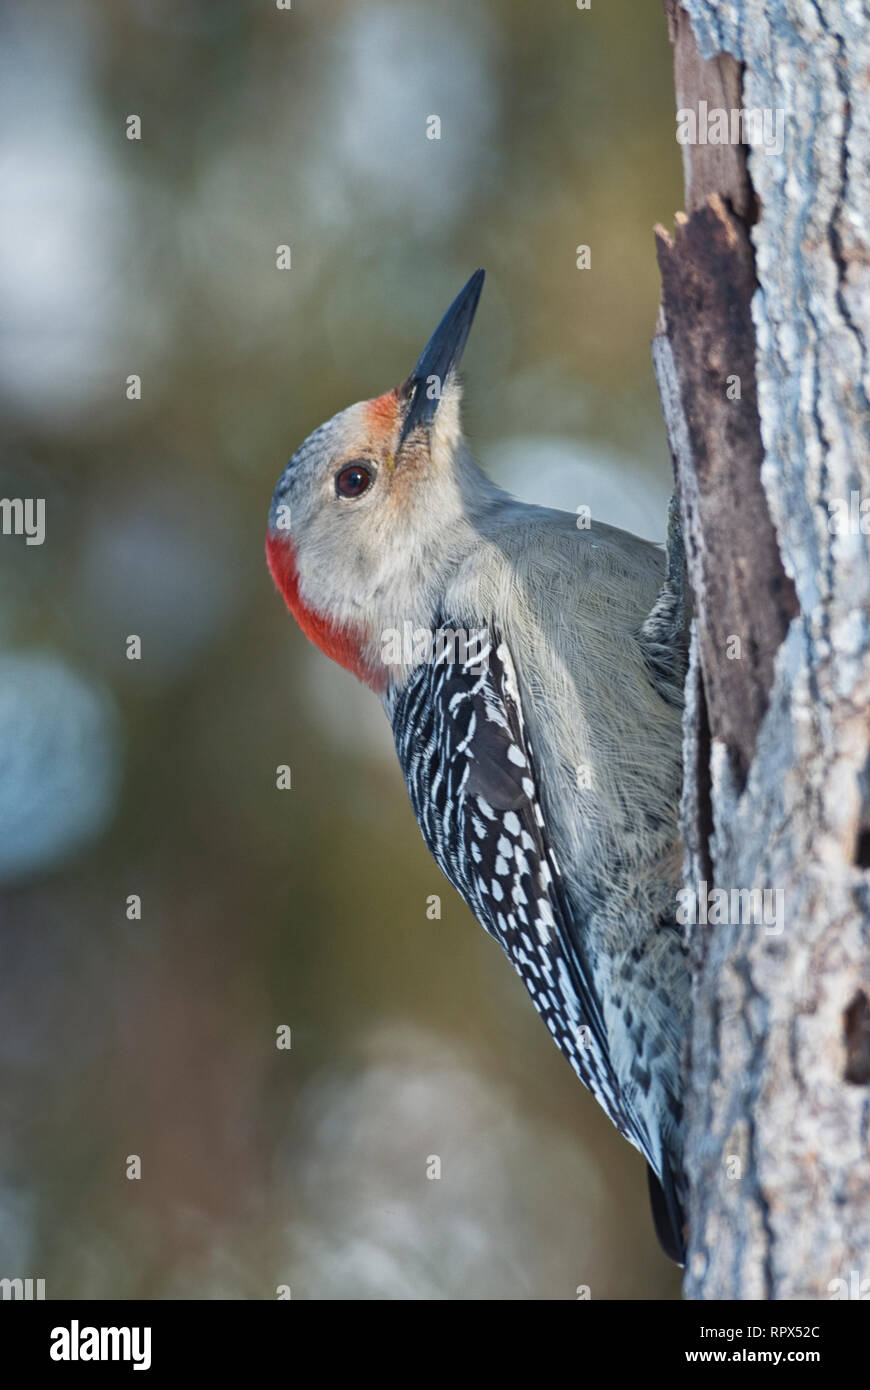 Zoologie/Tiere, Vogel/Vögeln (Aves), weiblich Red-bellied Woodpecker (Melanerpes carolinus) im Winter, Additional-Rights - Clearance-Info - Not-Available Stockfoto